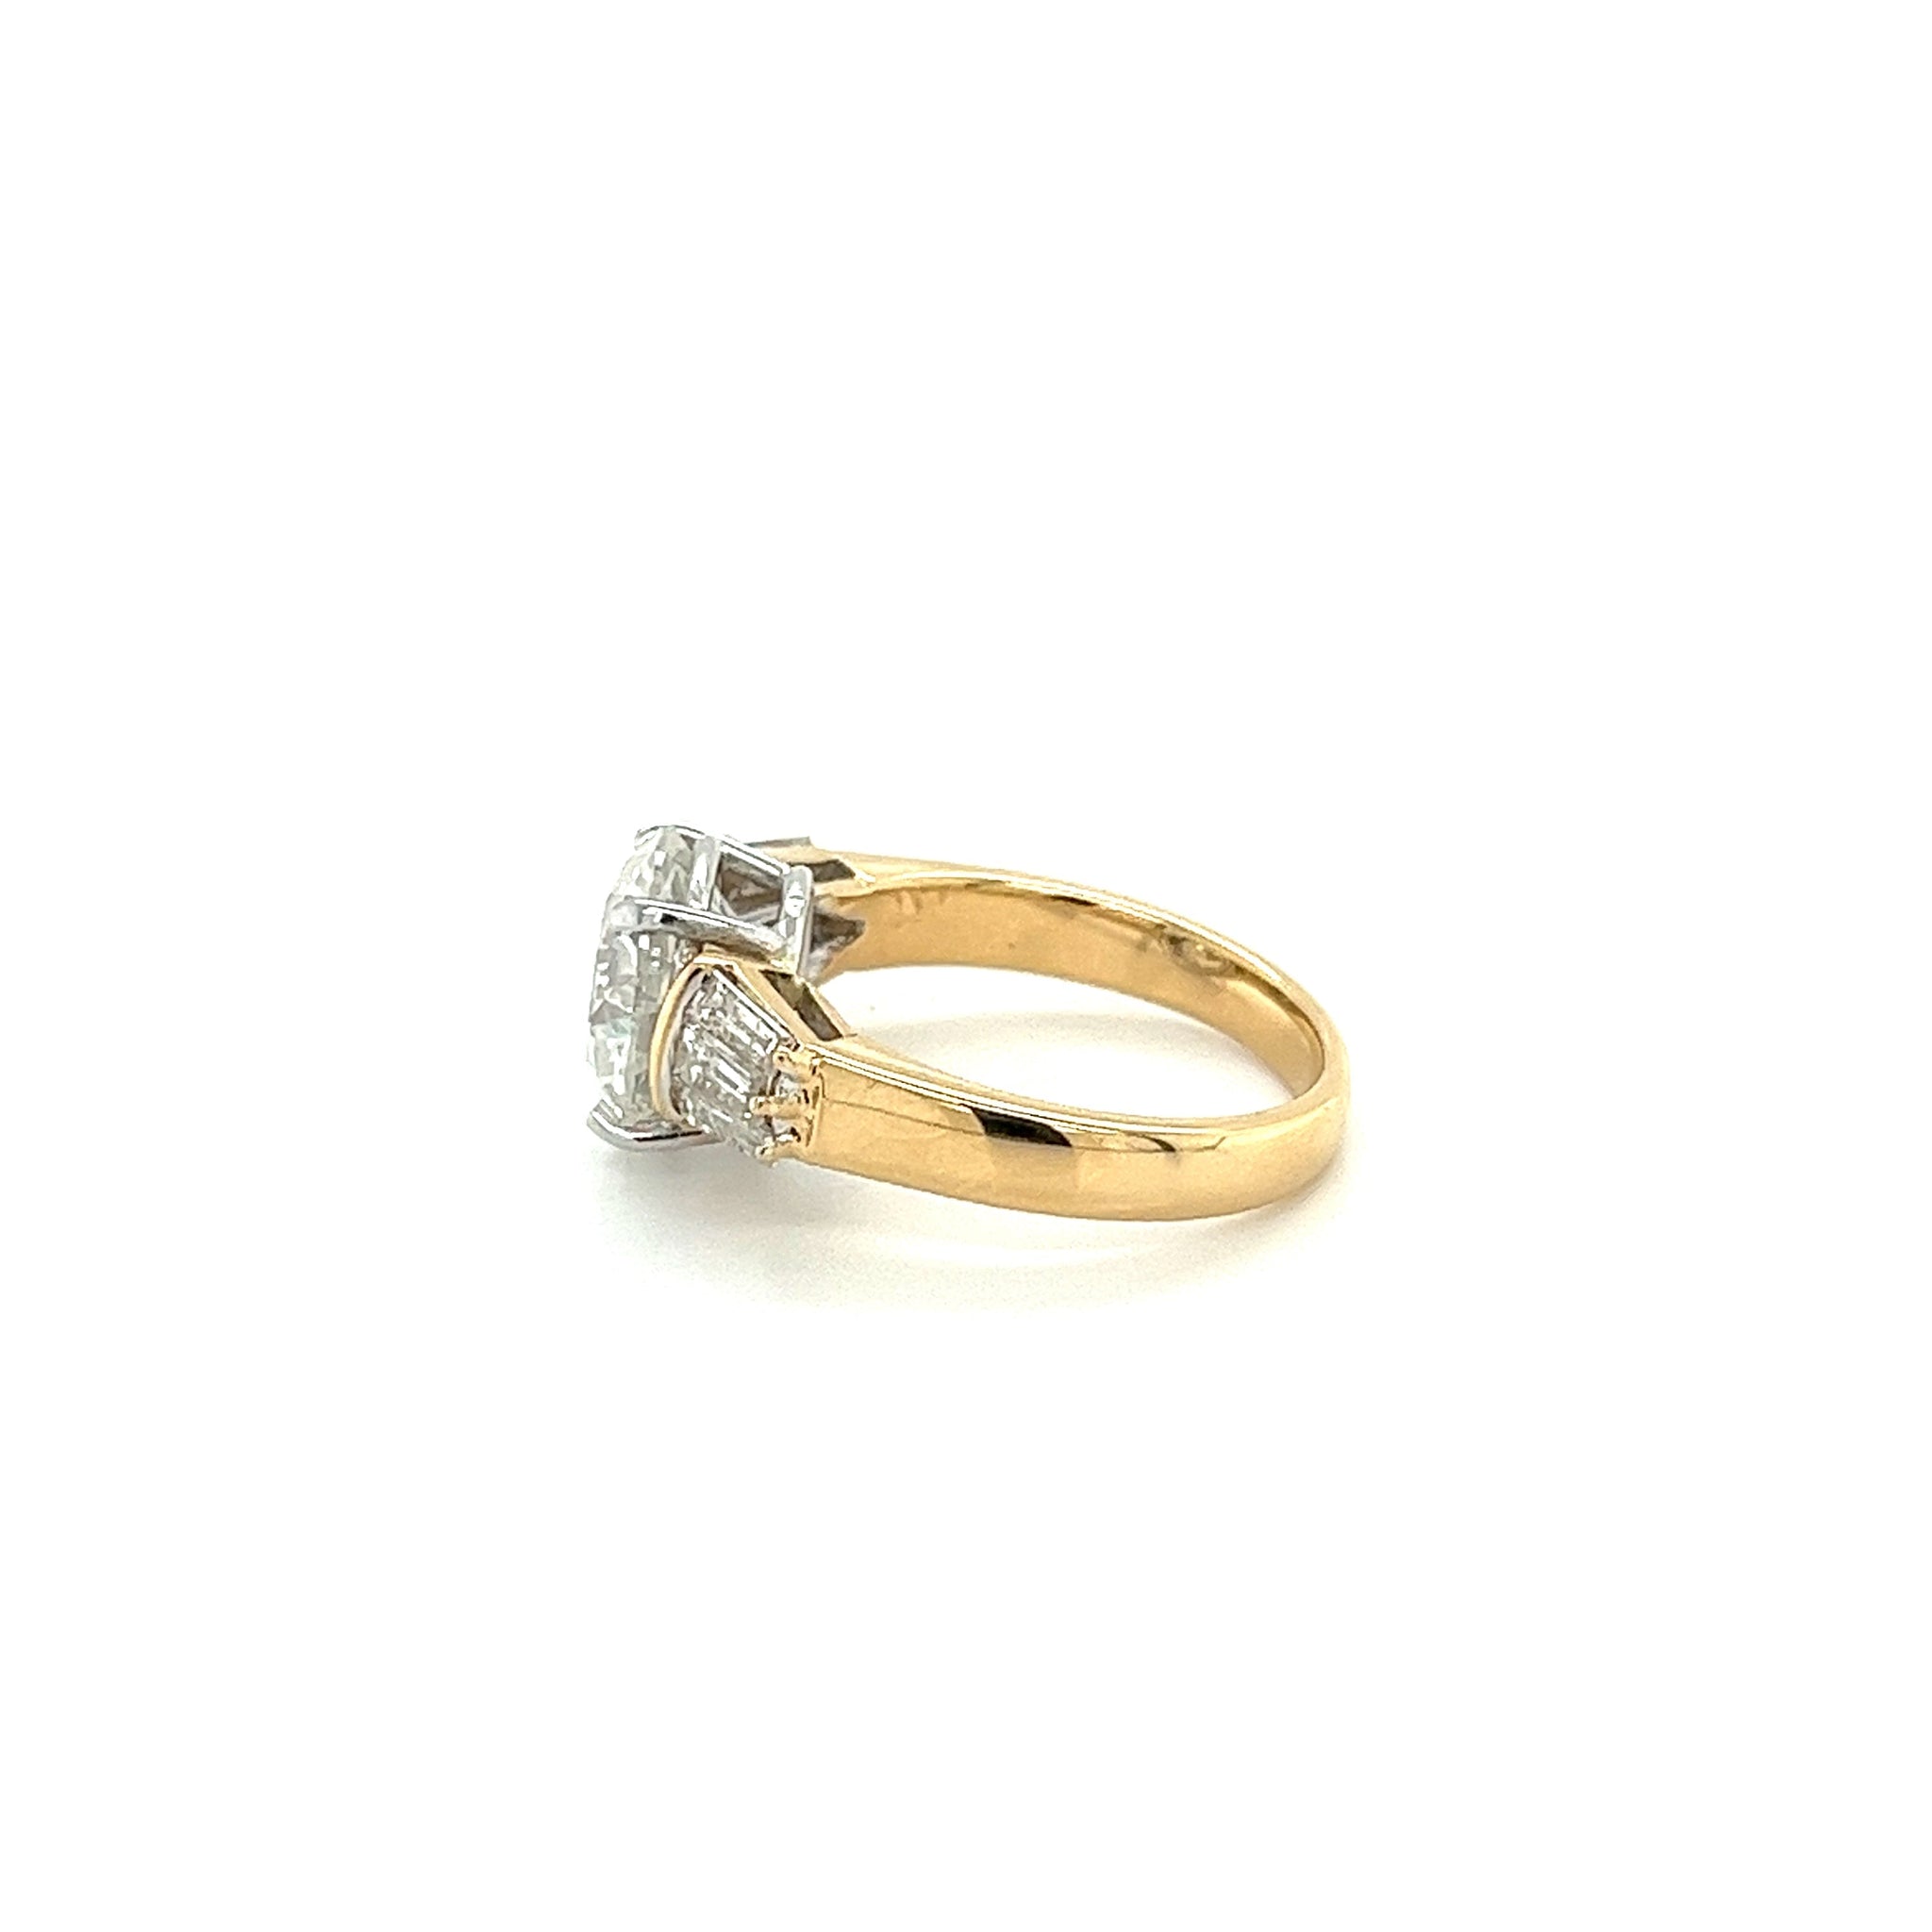 Natural 4.21 Carat Round Diamond Engagement Ring With Baguette Diamonds in Two Tone 18k Gold